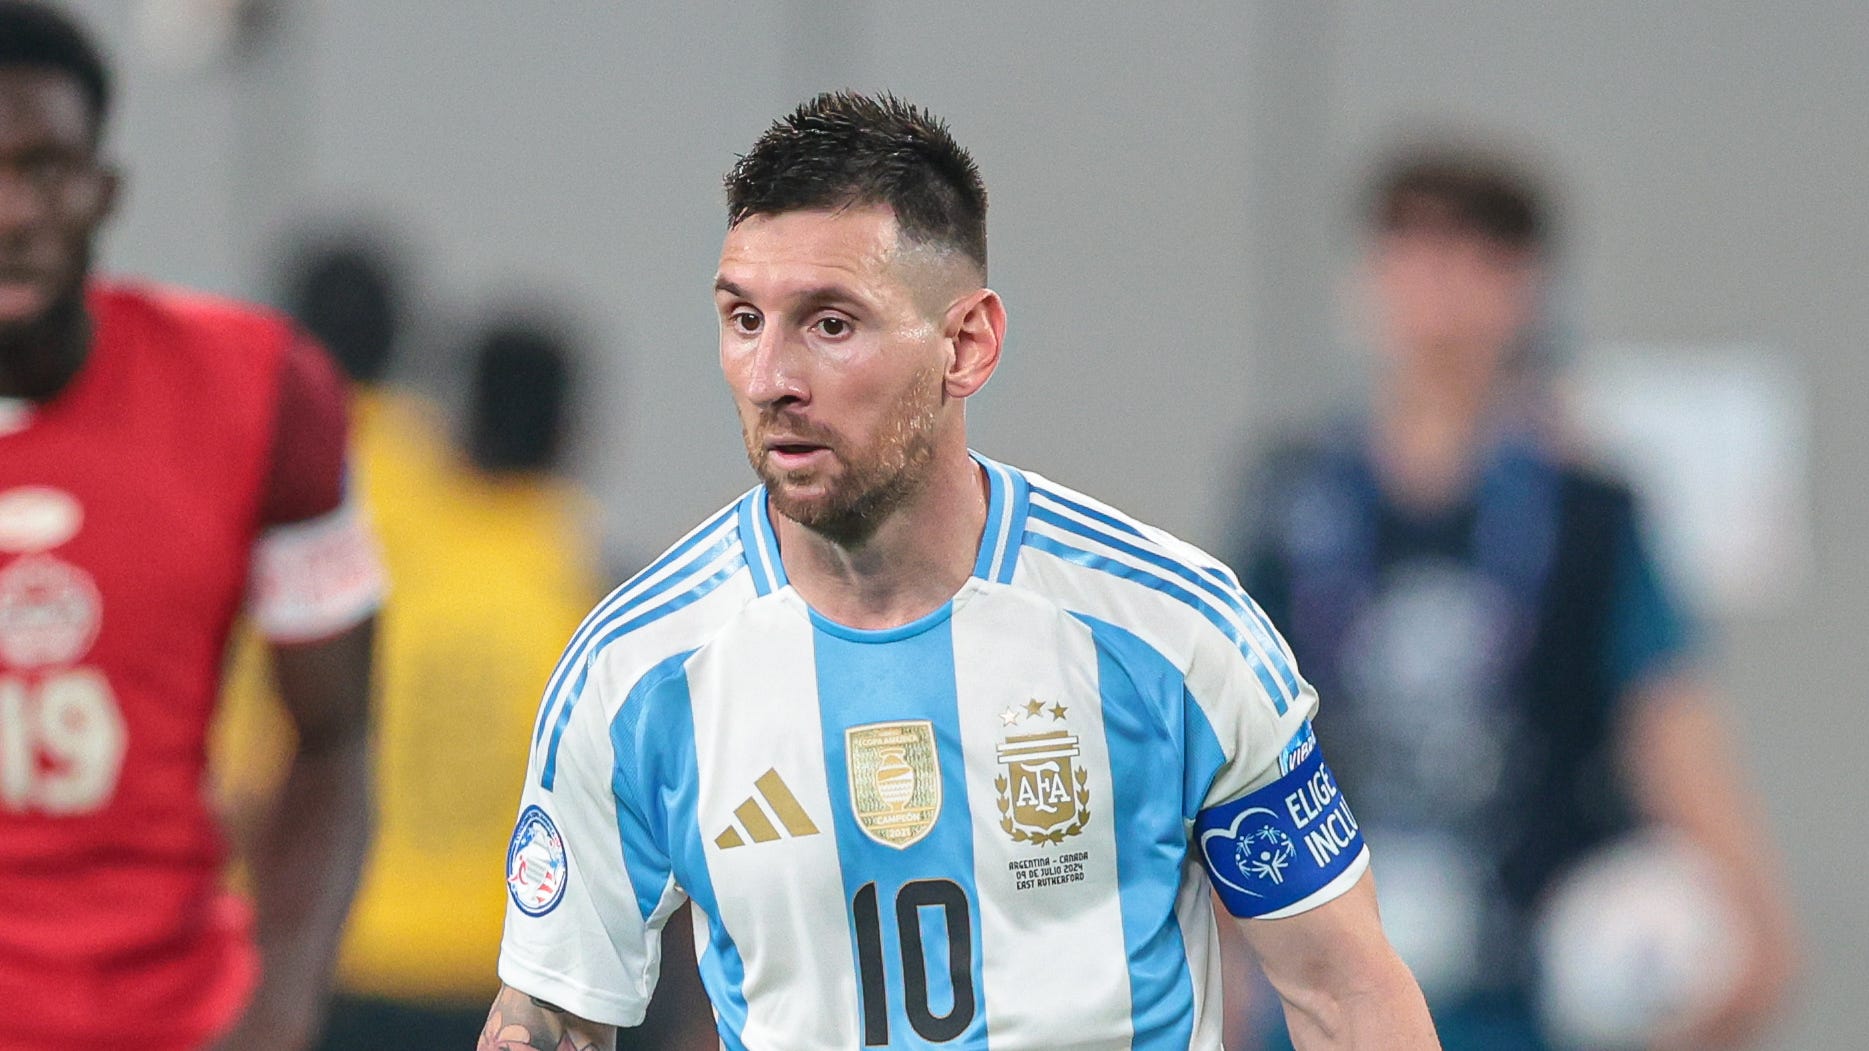 Copa America final live updates: Argentina vs. Colombia, what to know